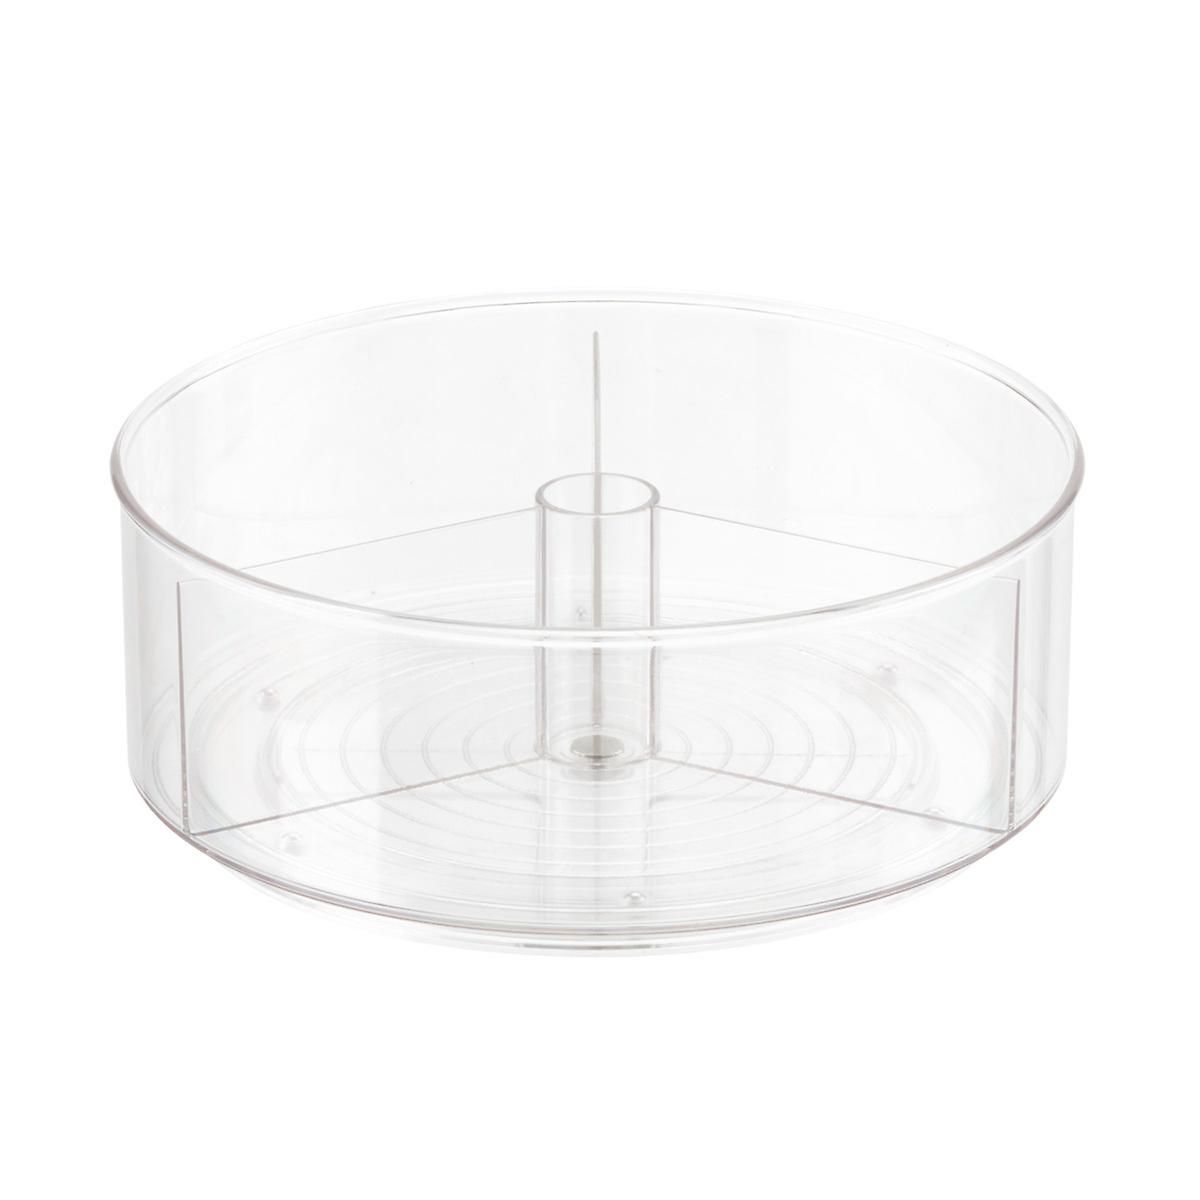 iDESIGN Linus 11" Divided Turntable Clear | The Container Store